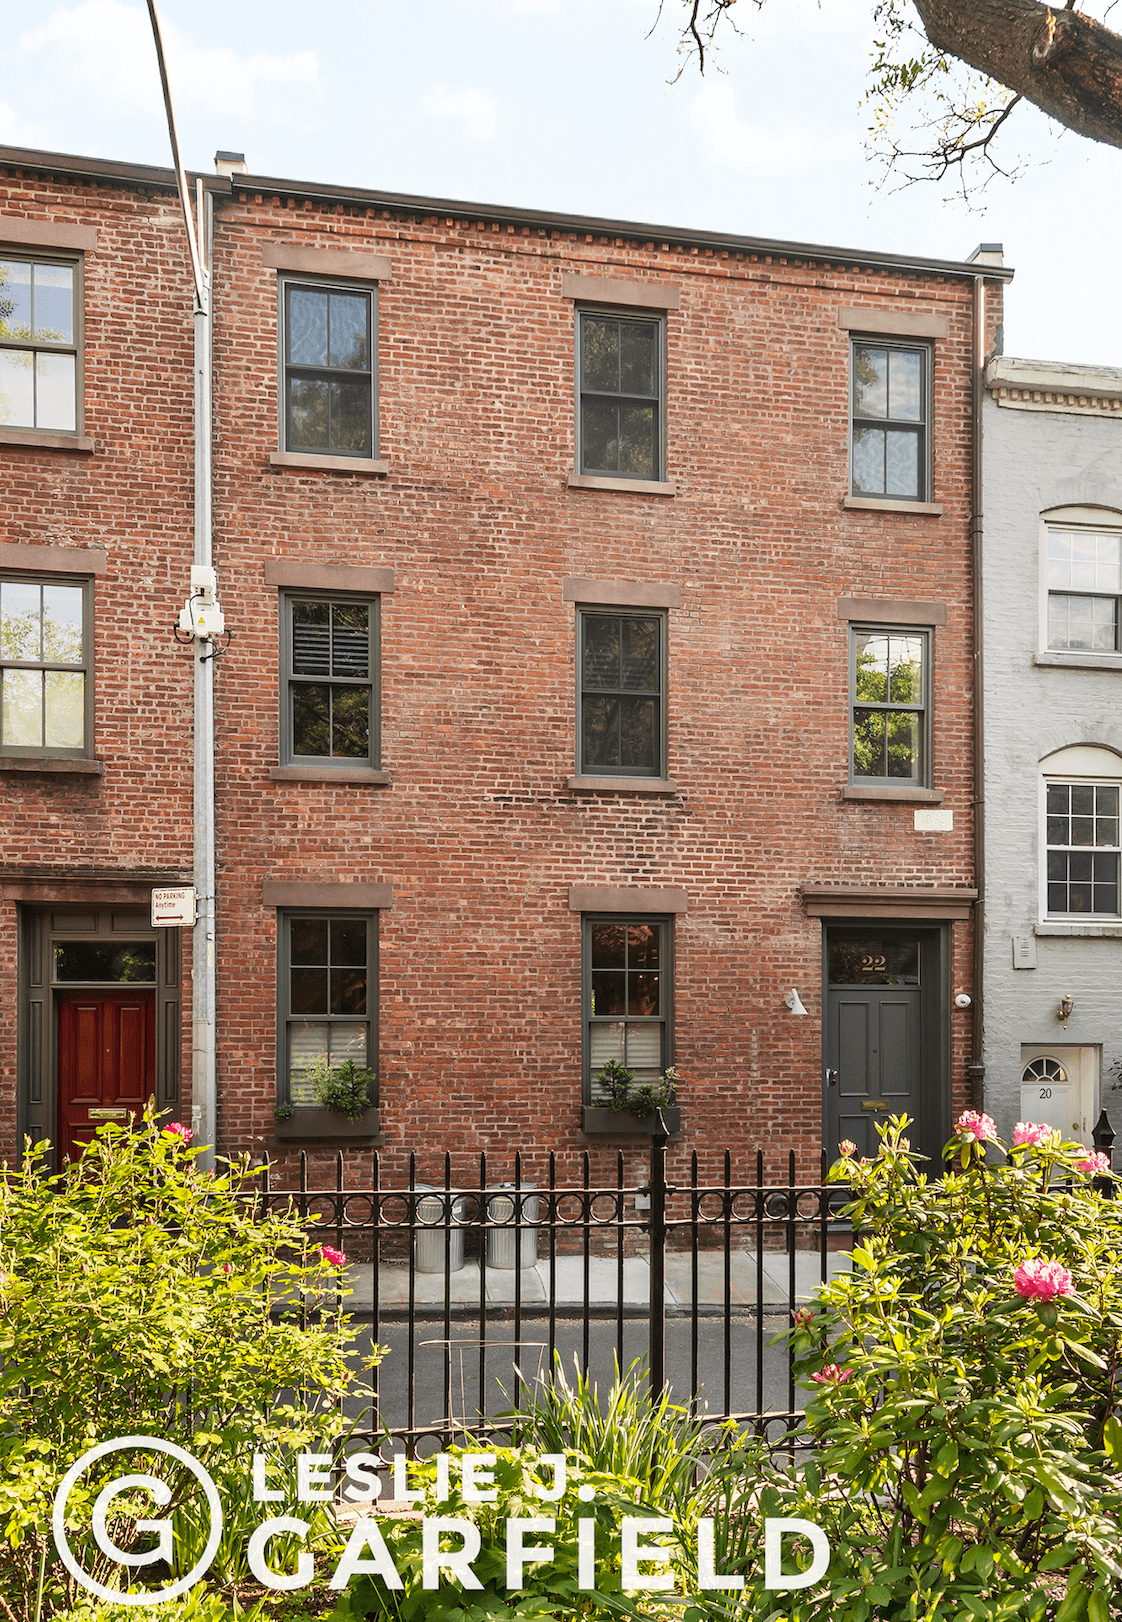 22 Verandah Place is a stunning, mint condition, single family townhouse in the heart of Cobble Hill, directly across from Cobble Hill Park.